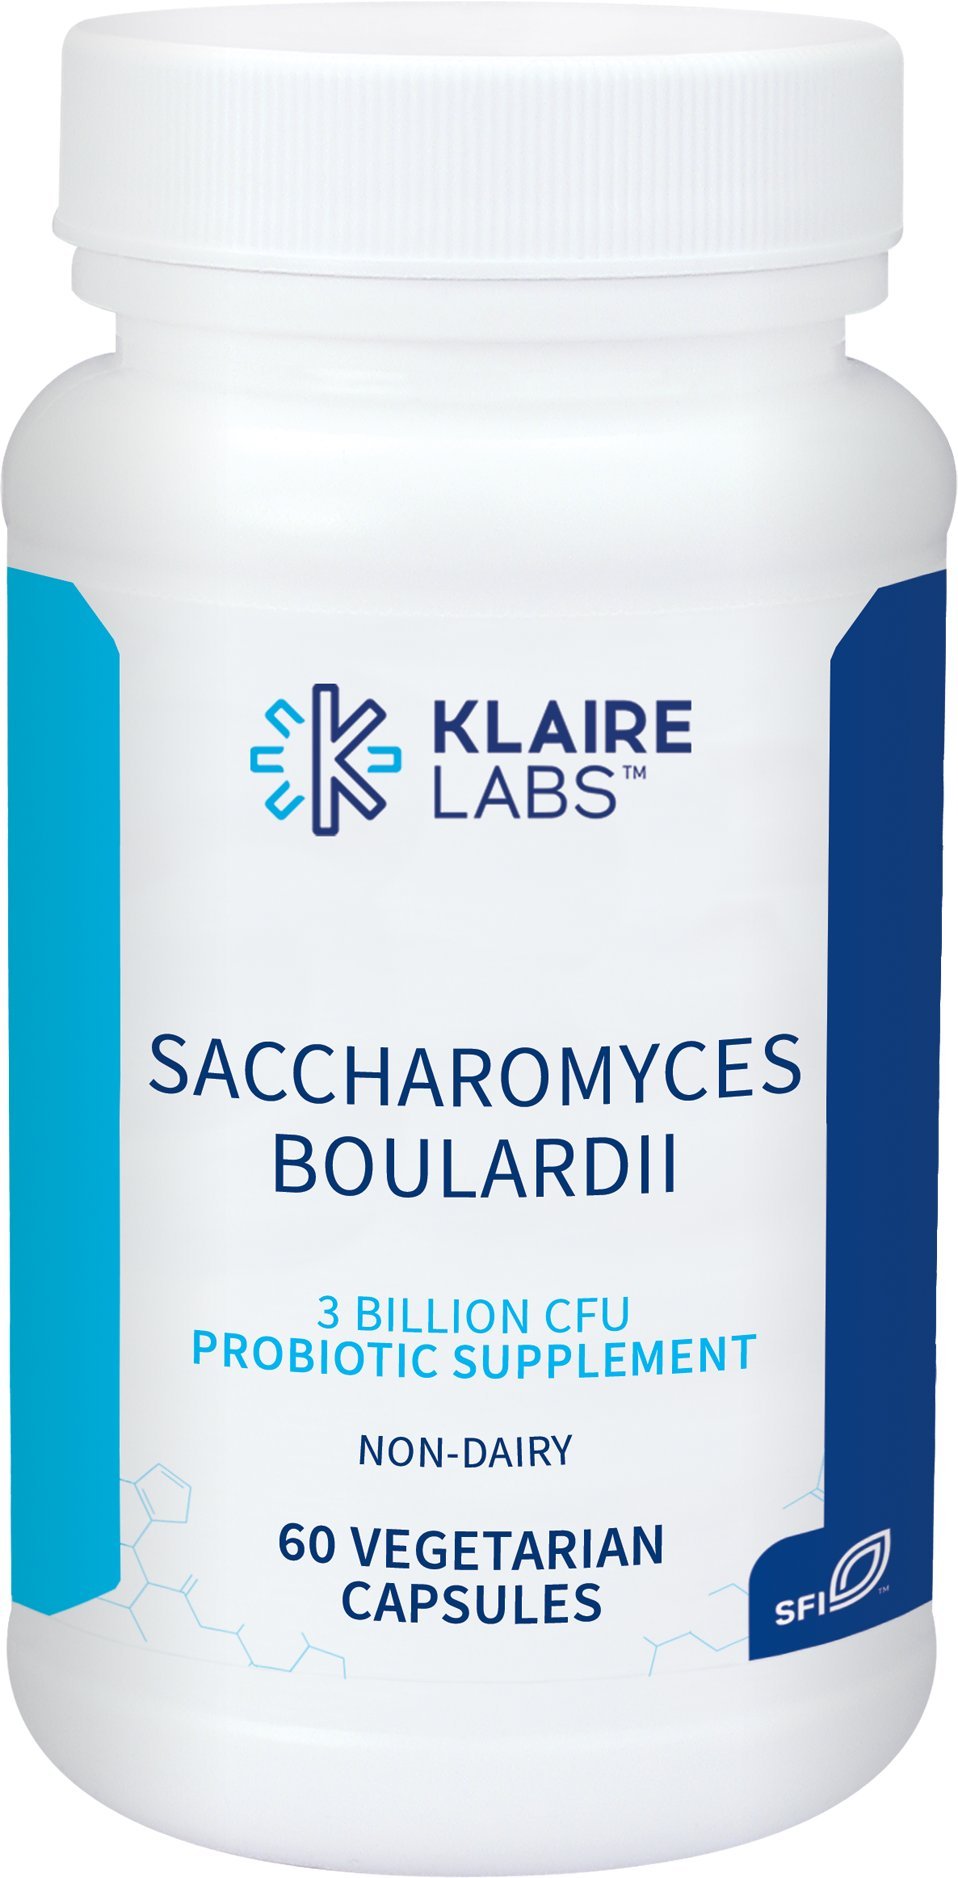 Book Cover Klaire Labs Saccharomyces Boulardii - Probiotic Supplement to Help Support Healthy Yeast Balance, Immune & Digestive Health - Acid Resistant, Shelf-Stable, Hypoallergenic & Dairy-Free (60 Capsules) 60.0 Servings (Pack of 1)